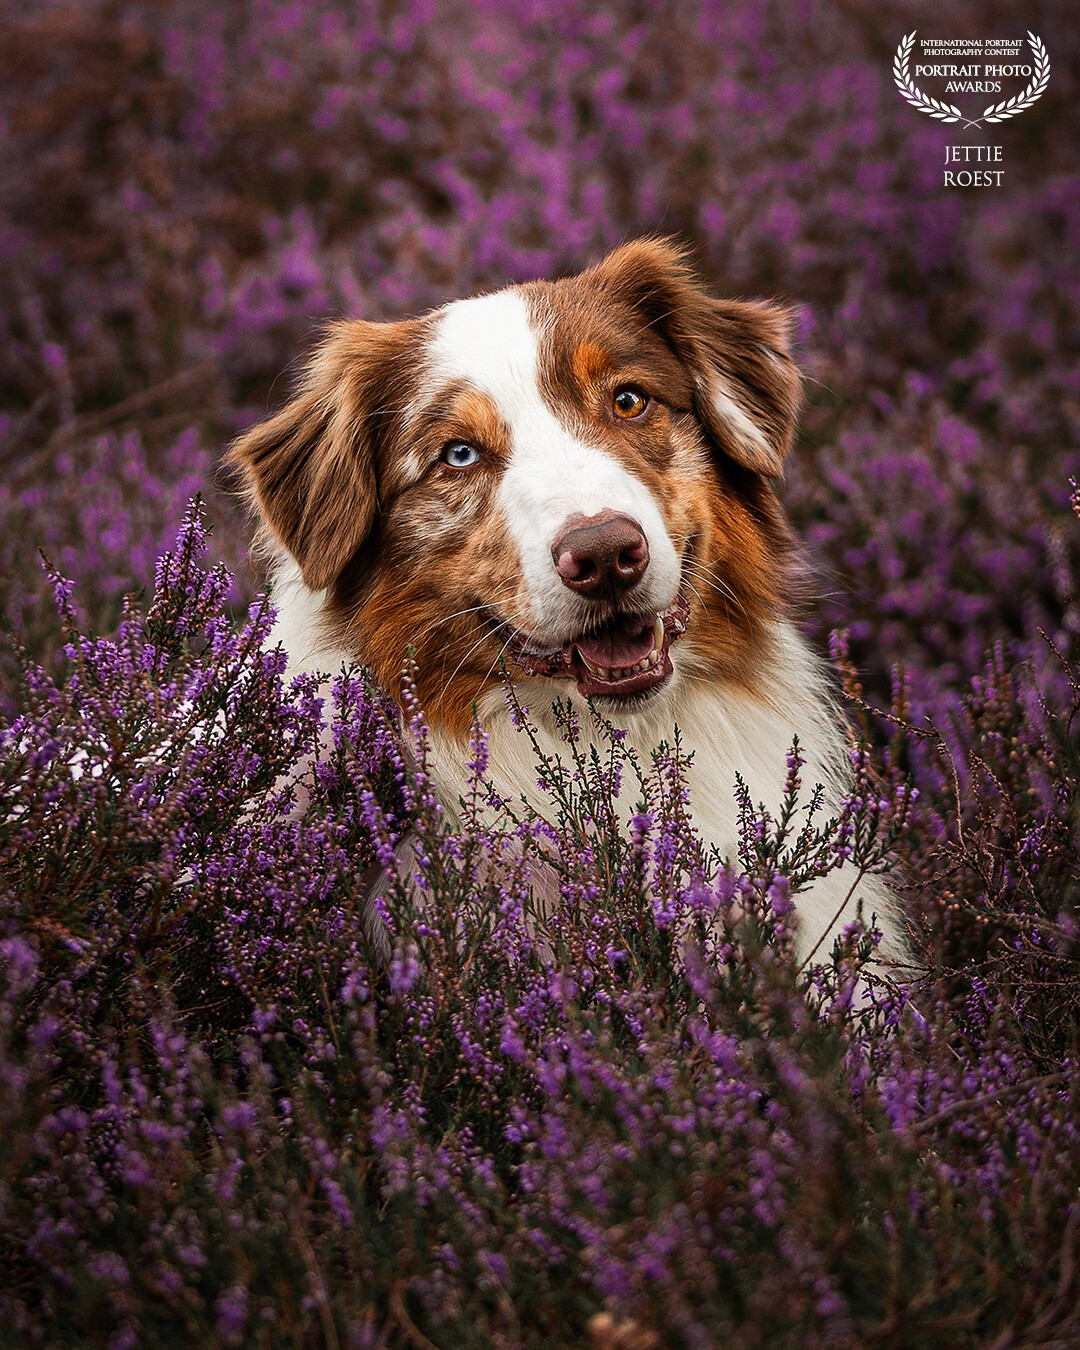 Australian Shepherd Buddha in the blooming heath on the Veluwe, Netherlands. I can really enjoy the blooming heather, there is something magical about that purple glow.